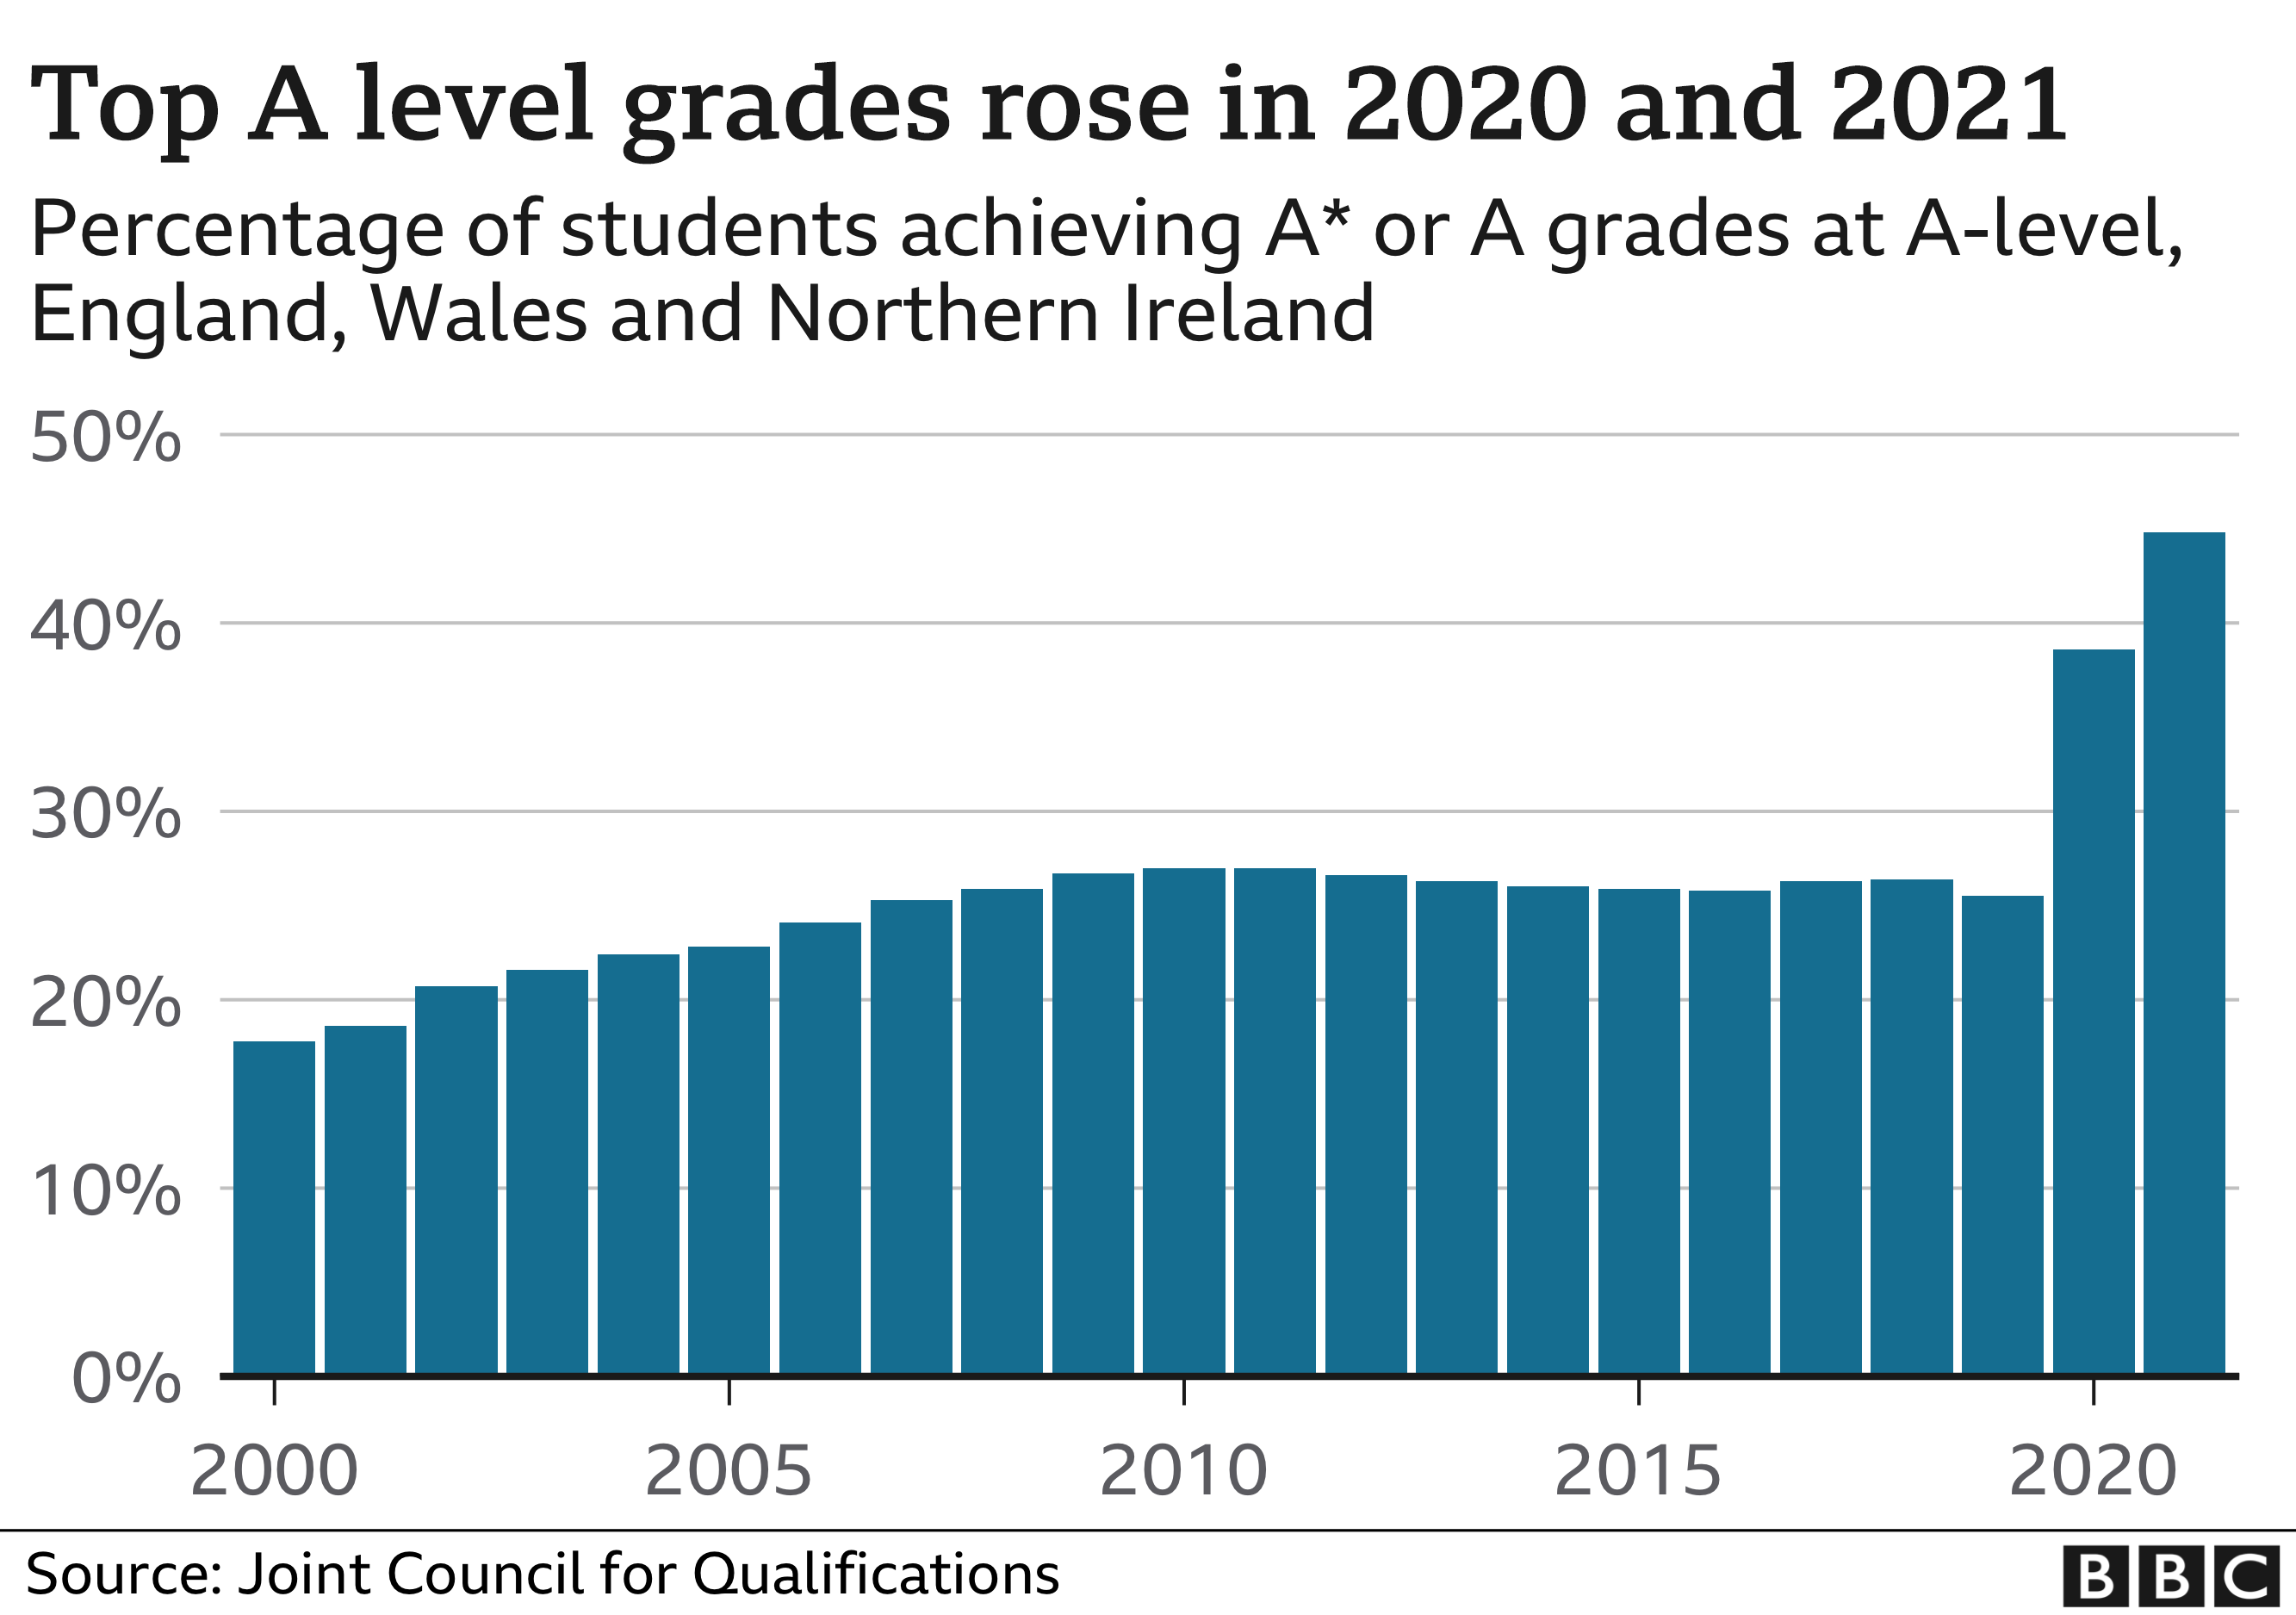 Graph showing top A level grades rose in 2020 and 2021